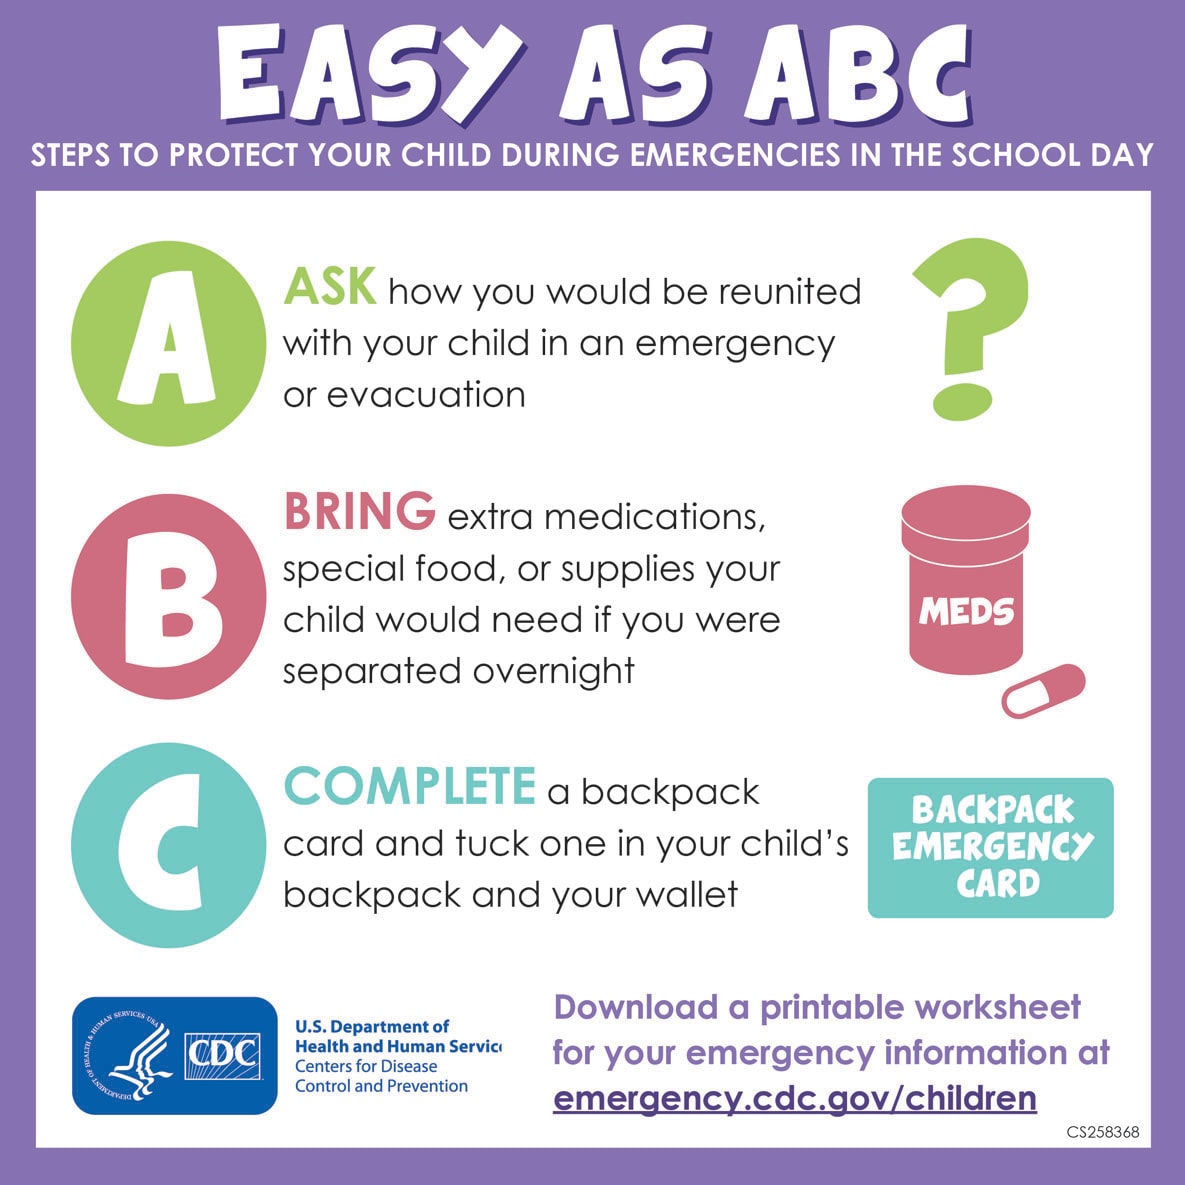 Easy as ABC Infographic